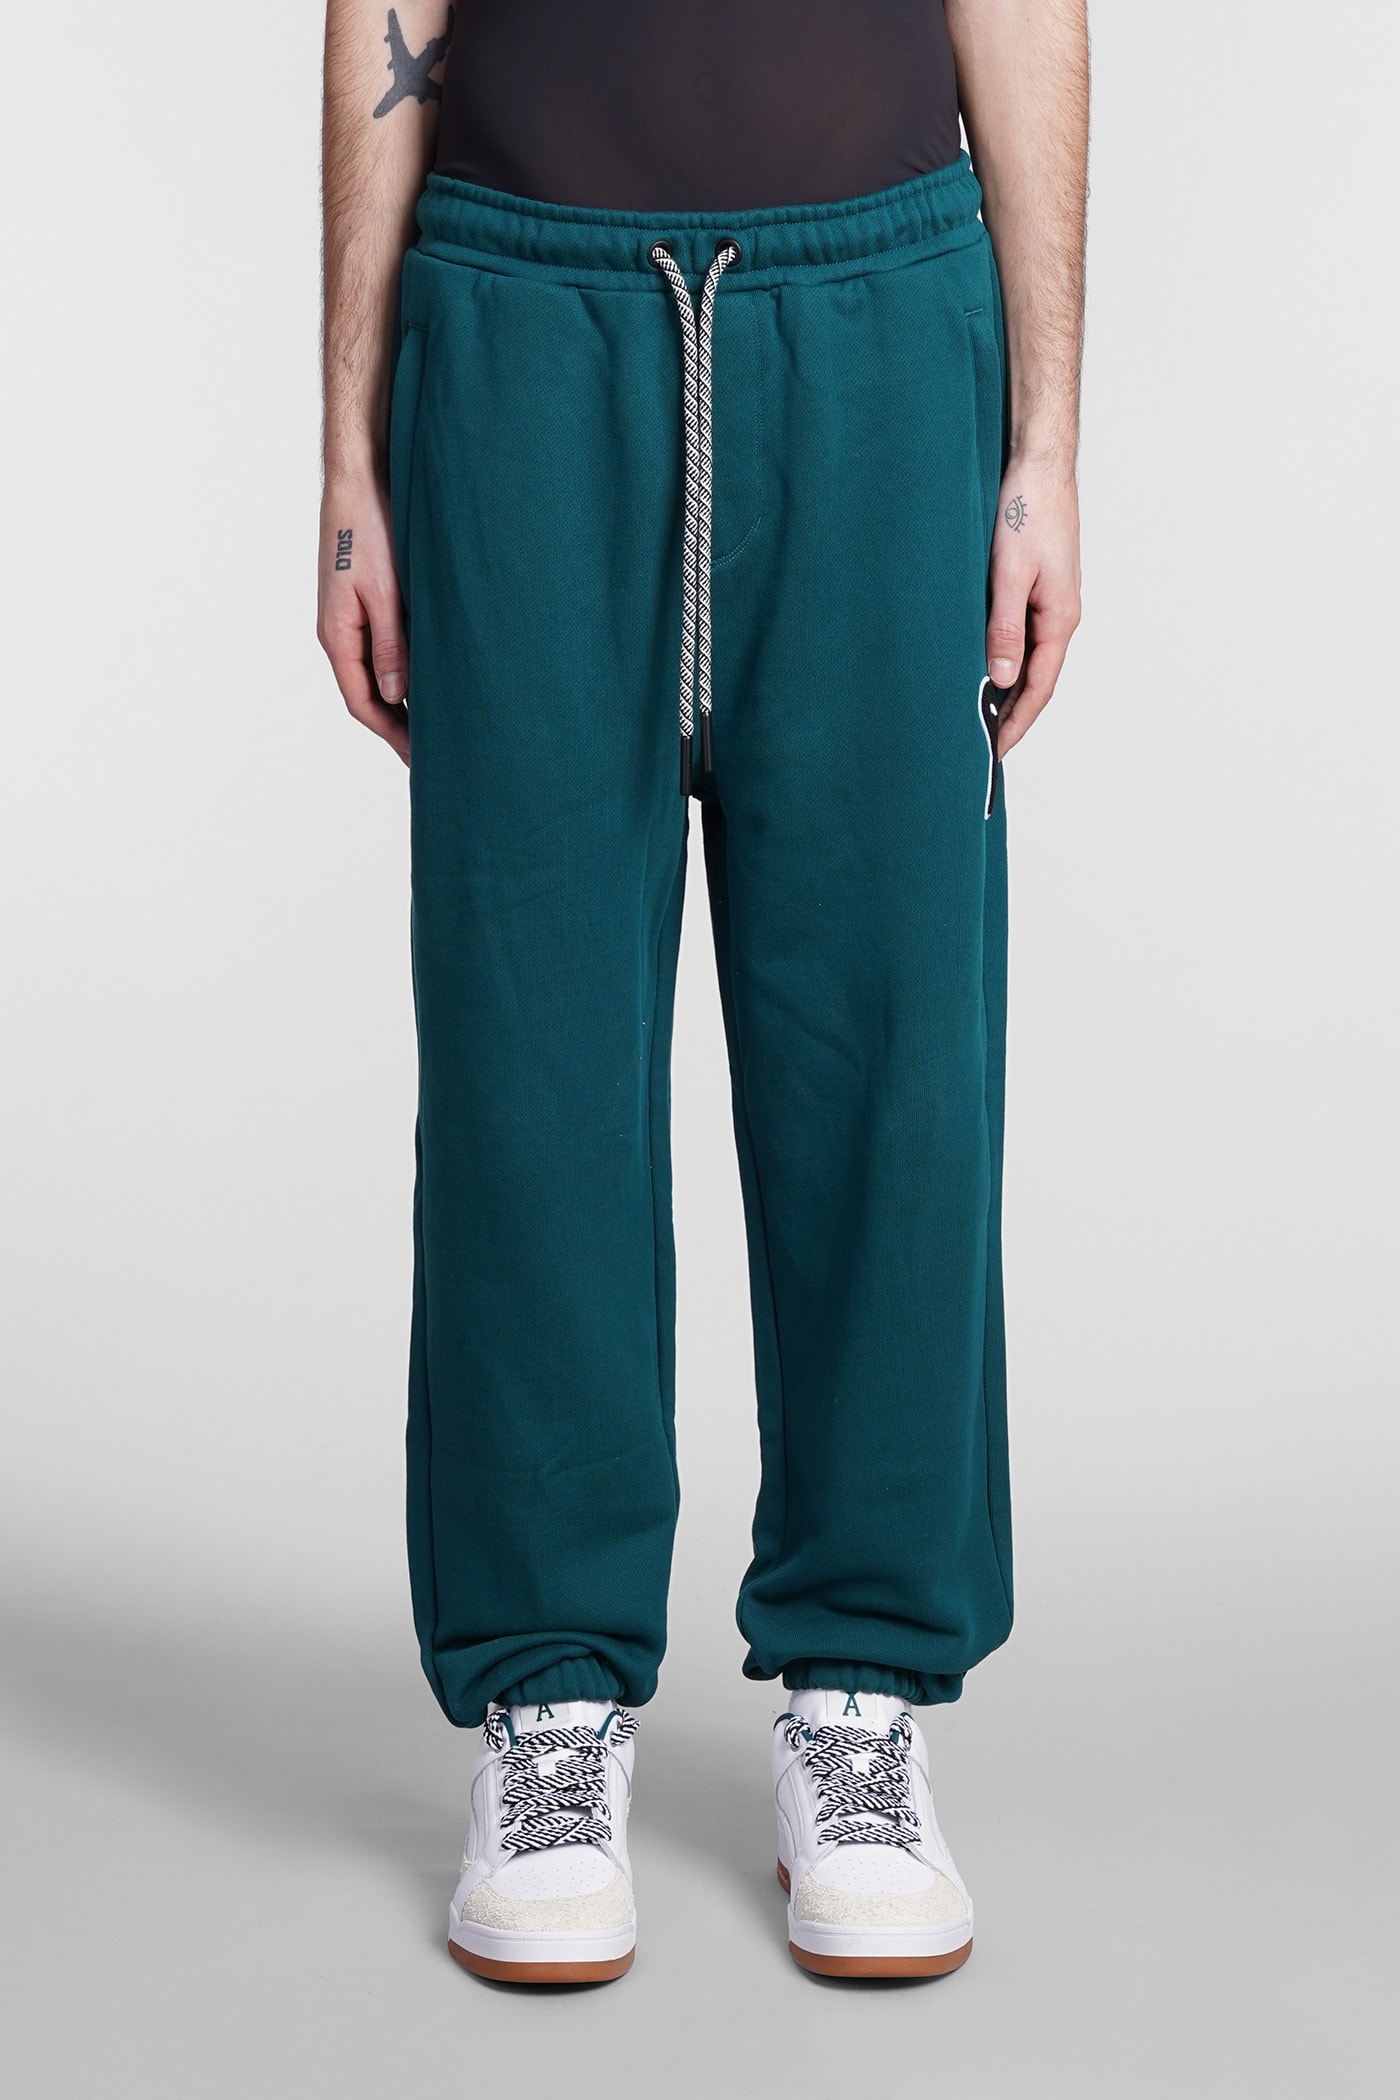 PUMA PANTS IN GREEN COTTON